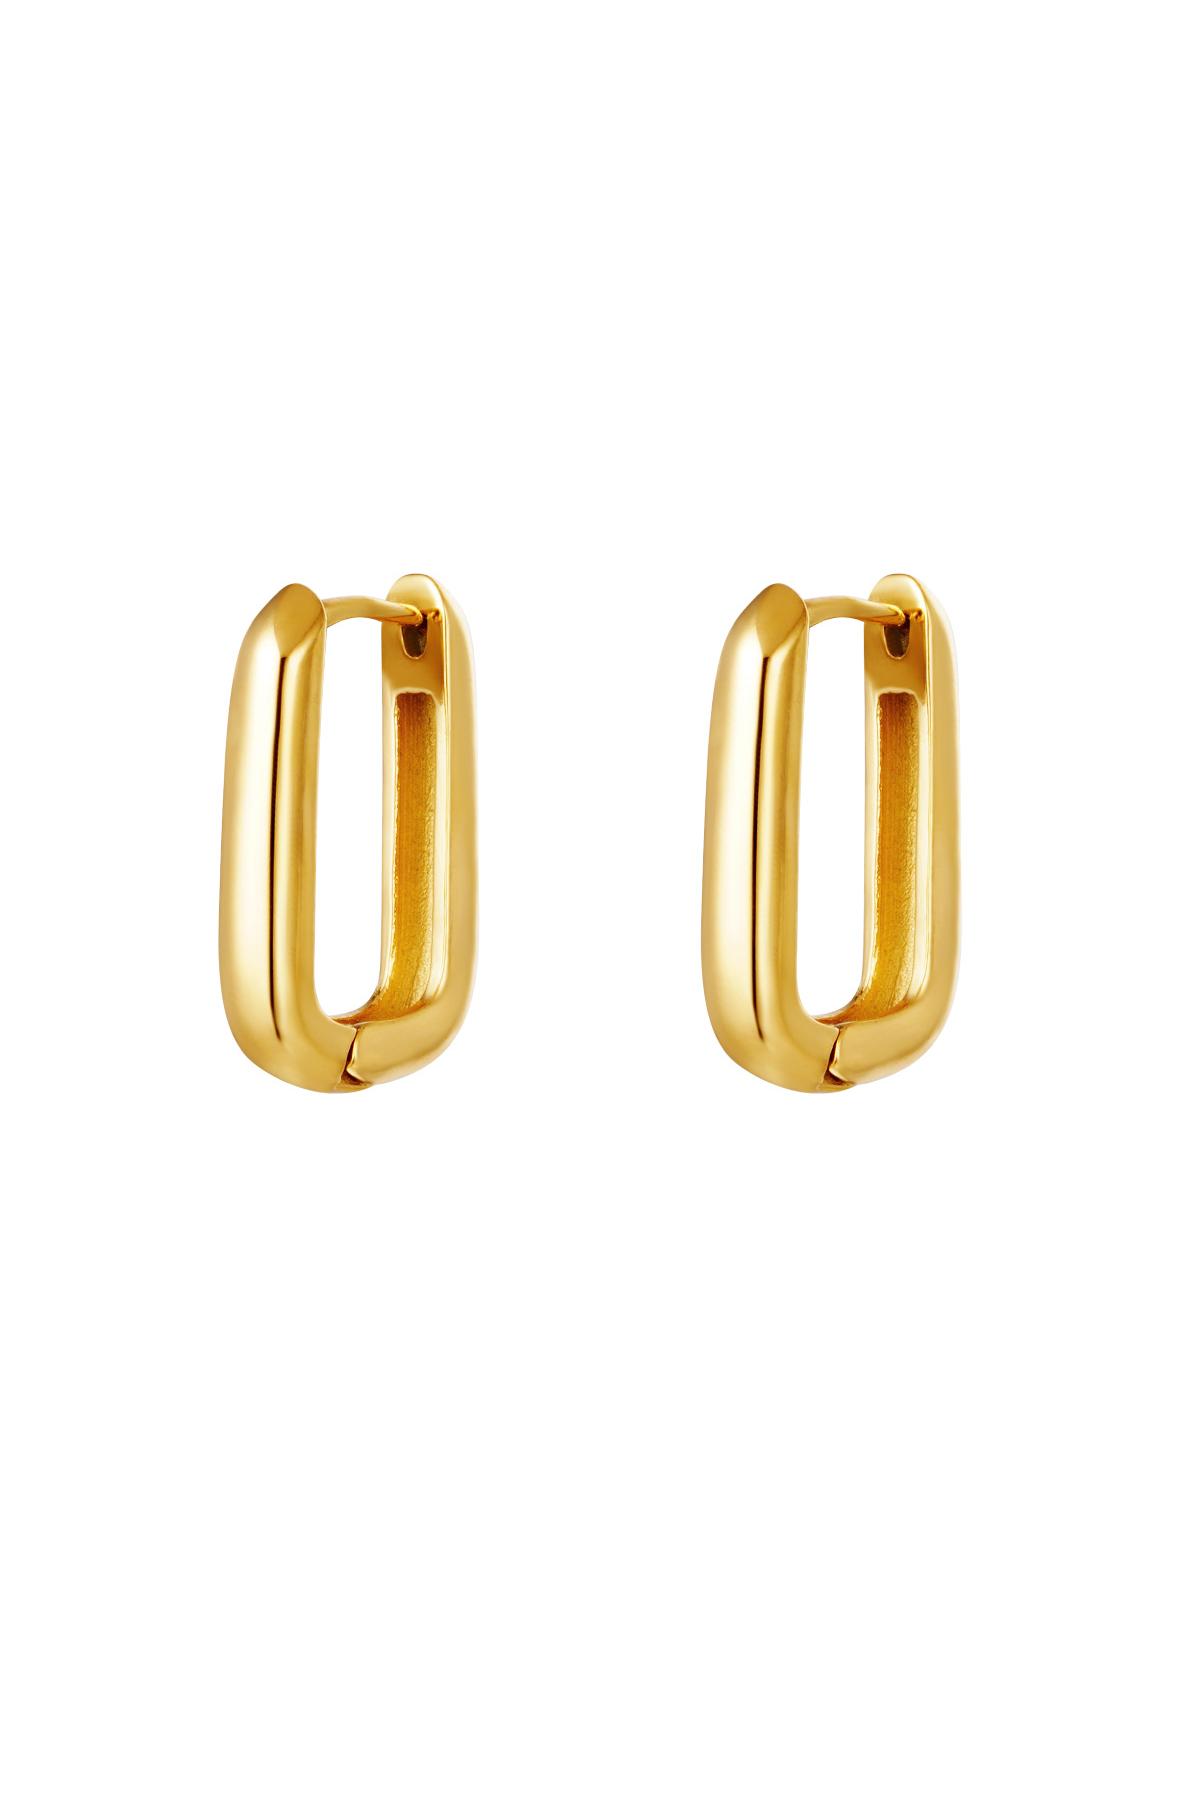 Earrings square large Gold Stainless Steel 